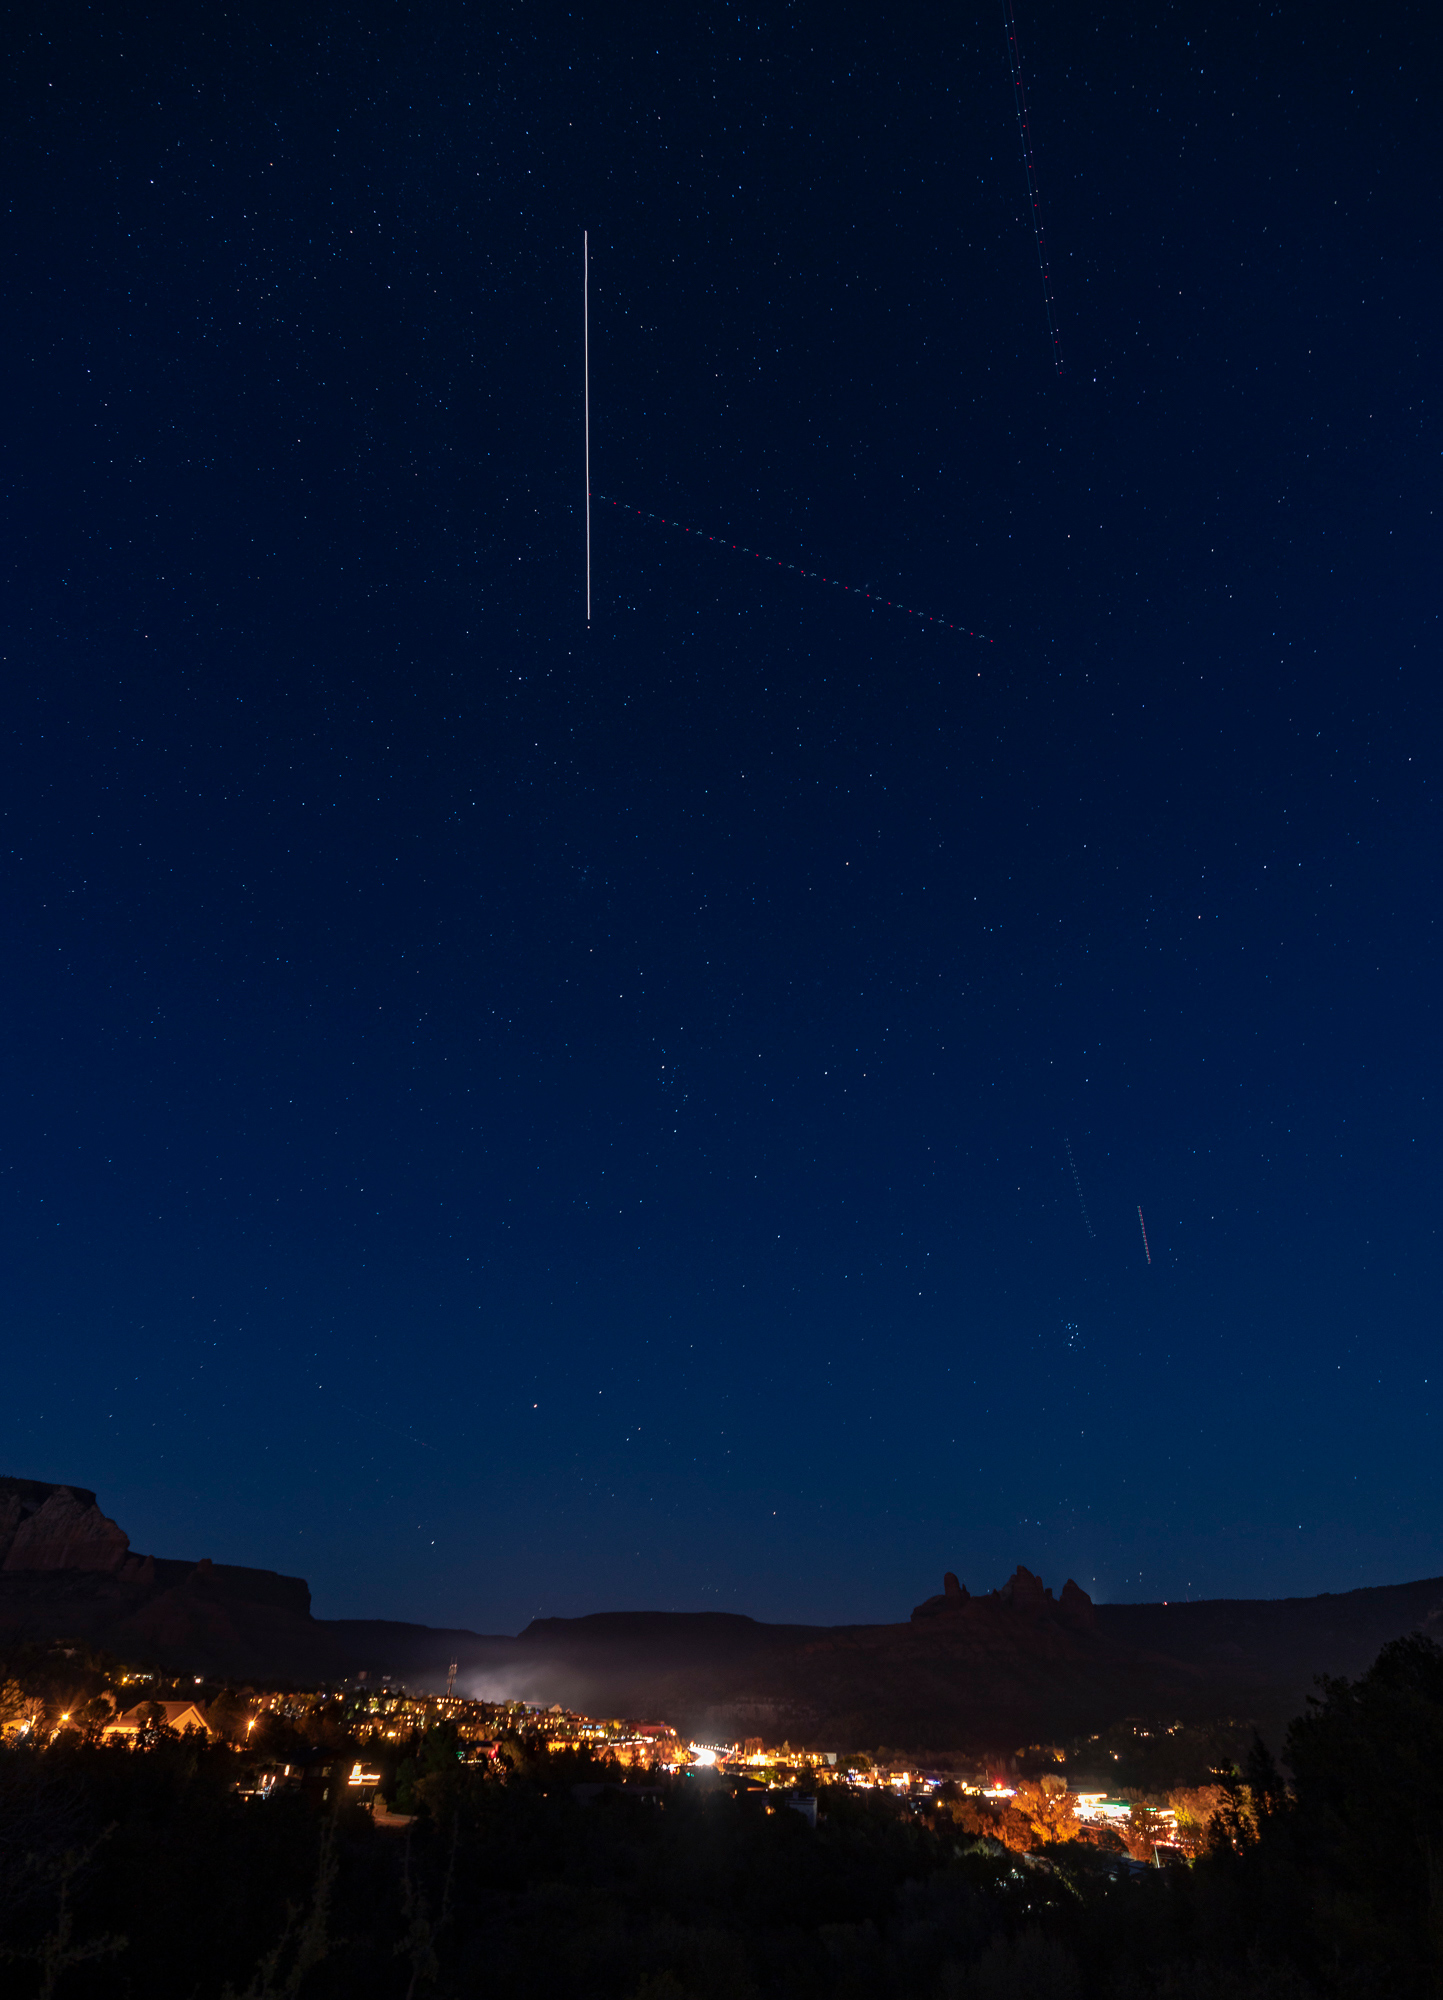 Space Station and Night Sky Over Sedona